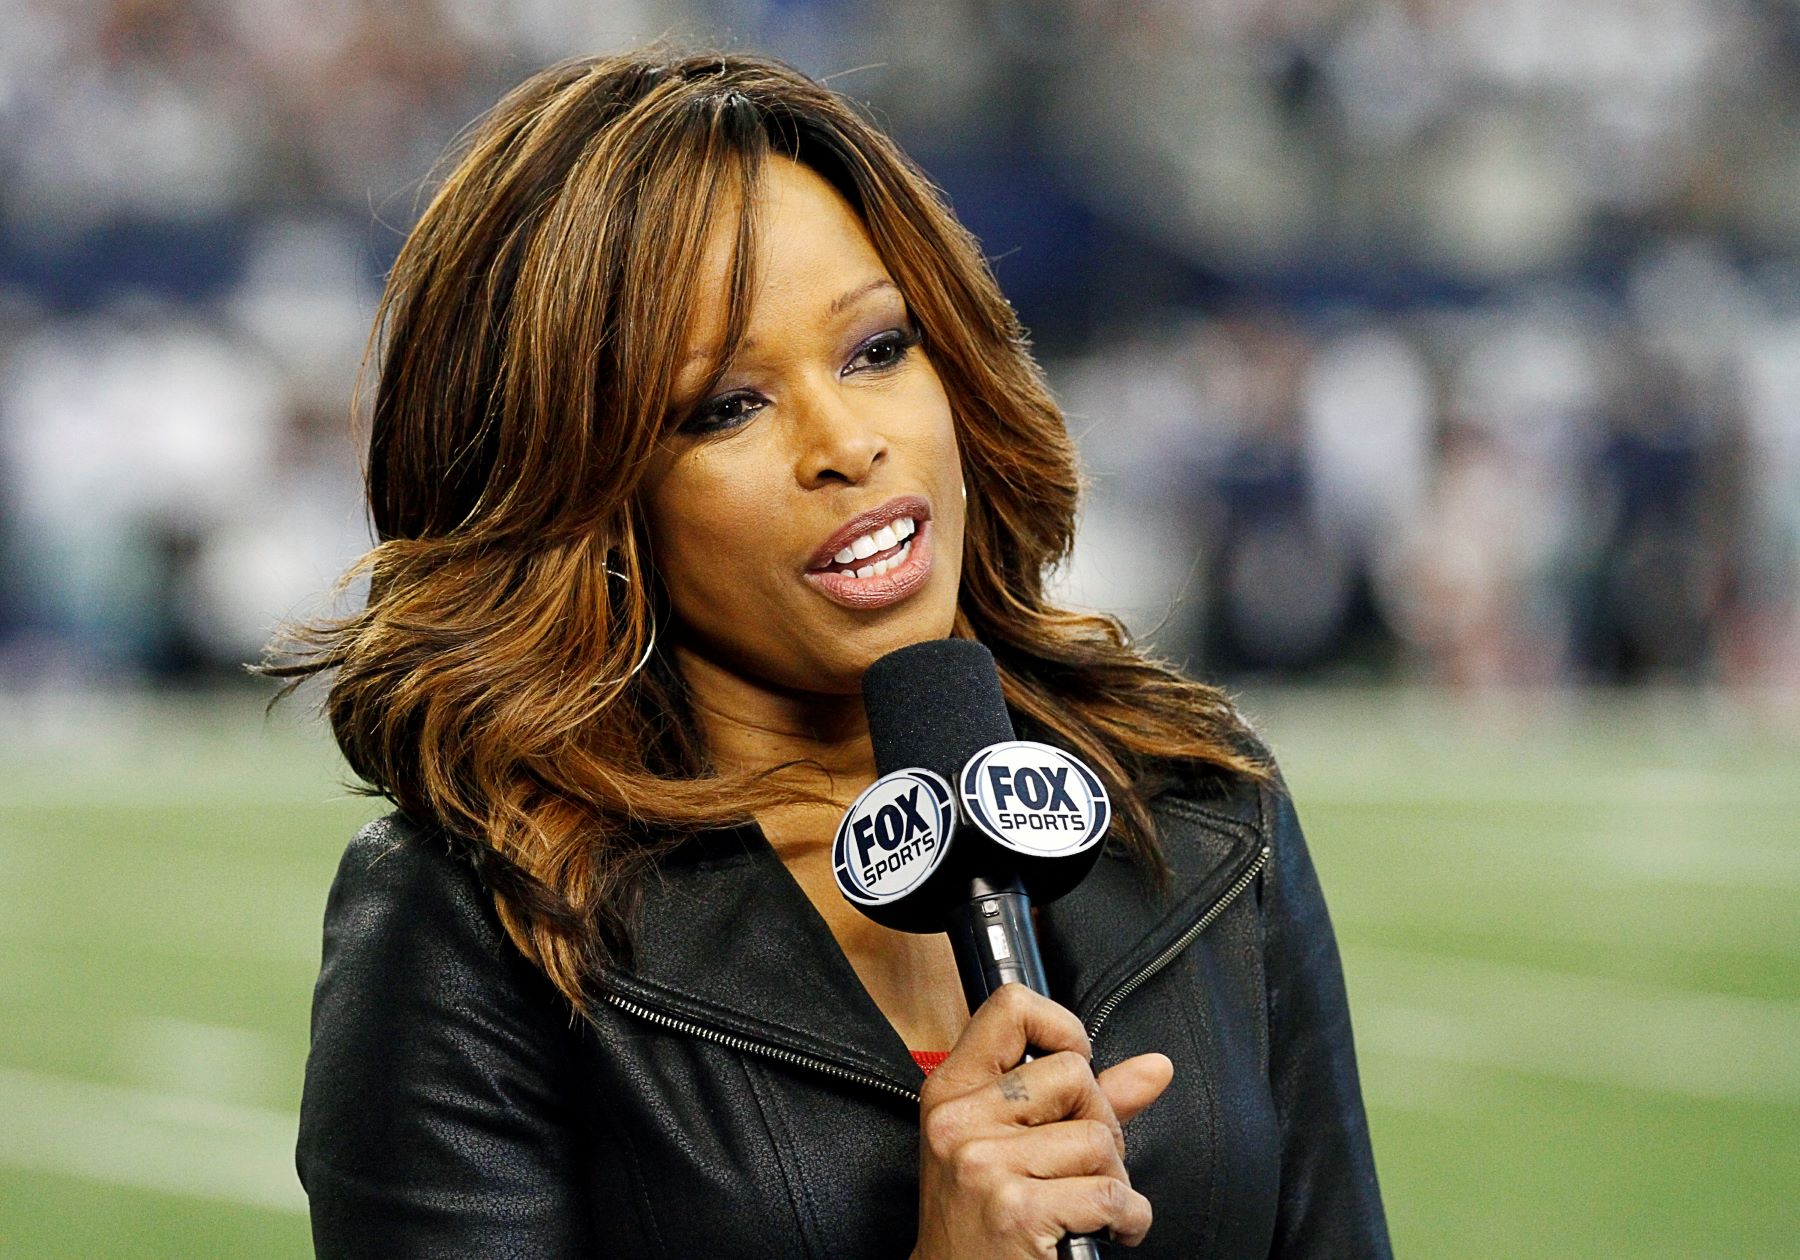 Fox Sports NFL sideline reporter Pam Oliver covering an NFL football game between the Green Bay Packers and Dallas Cowboys